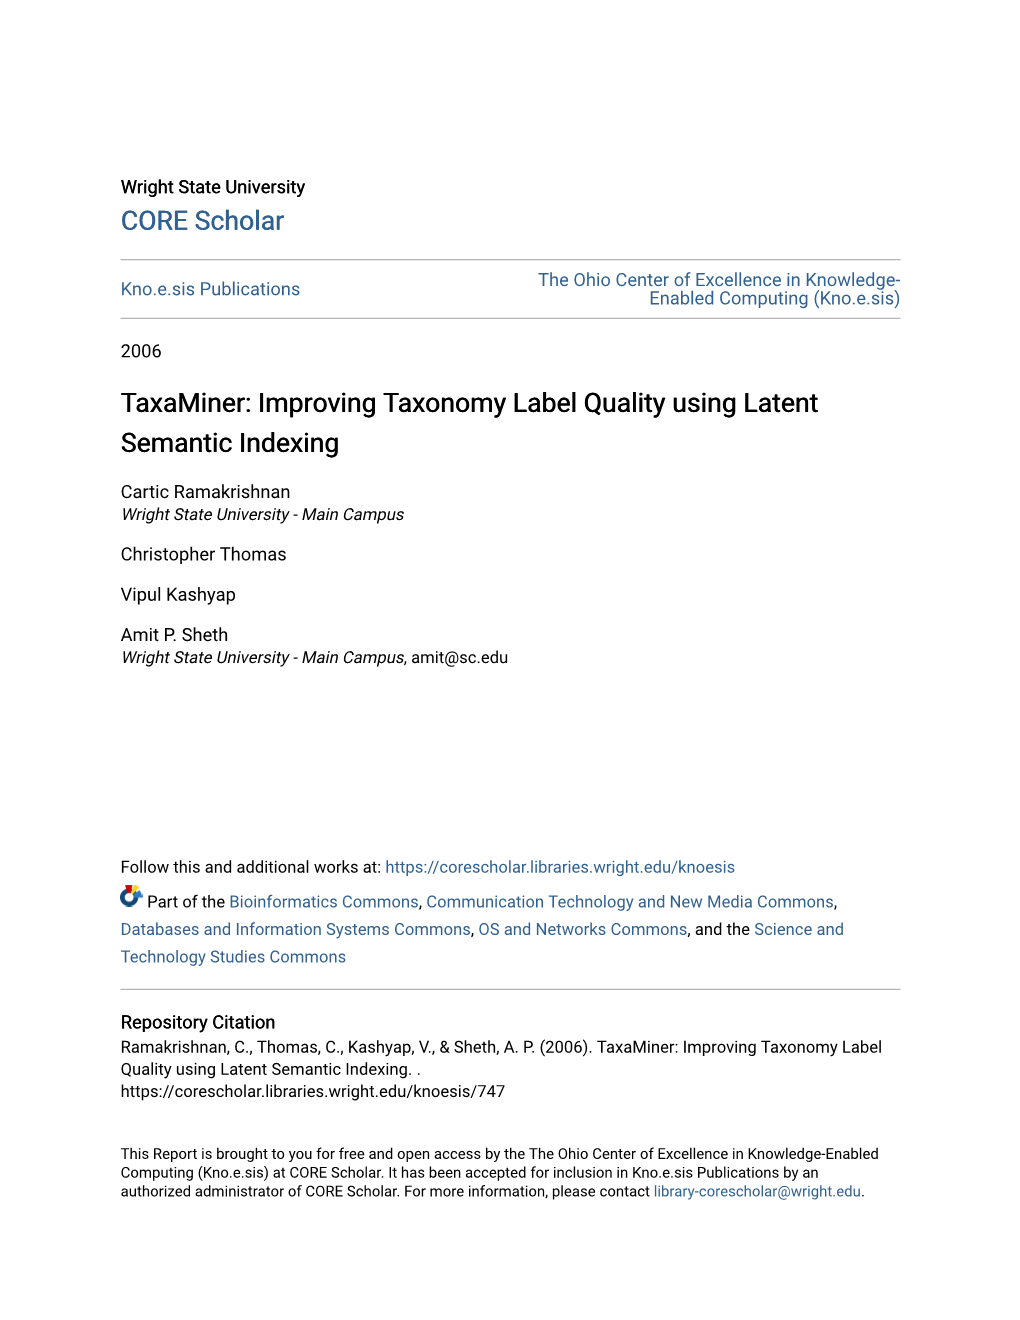 Improving Taxonomy Label Quality Using Latent Semantic Indexing